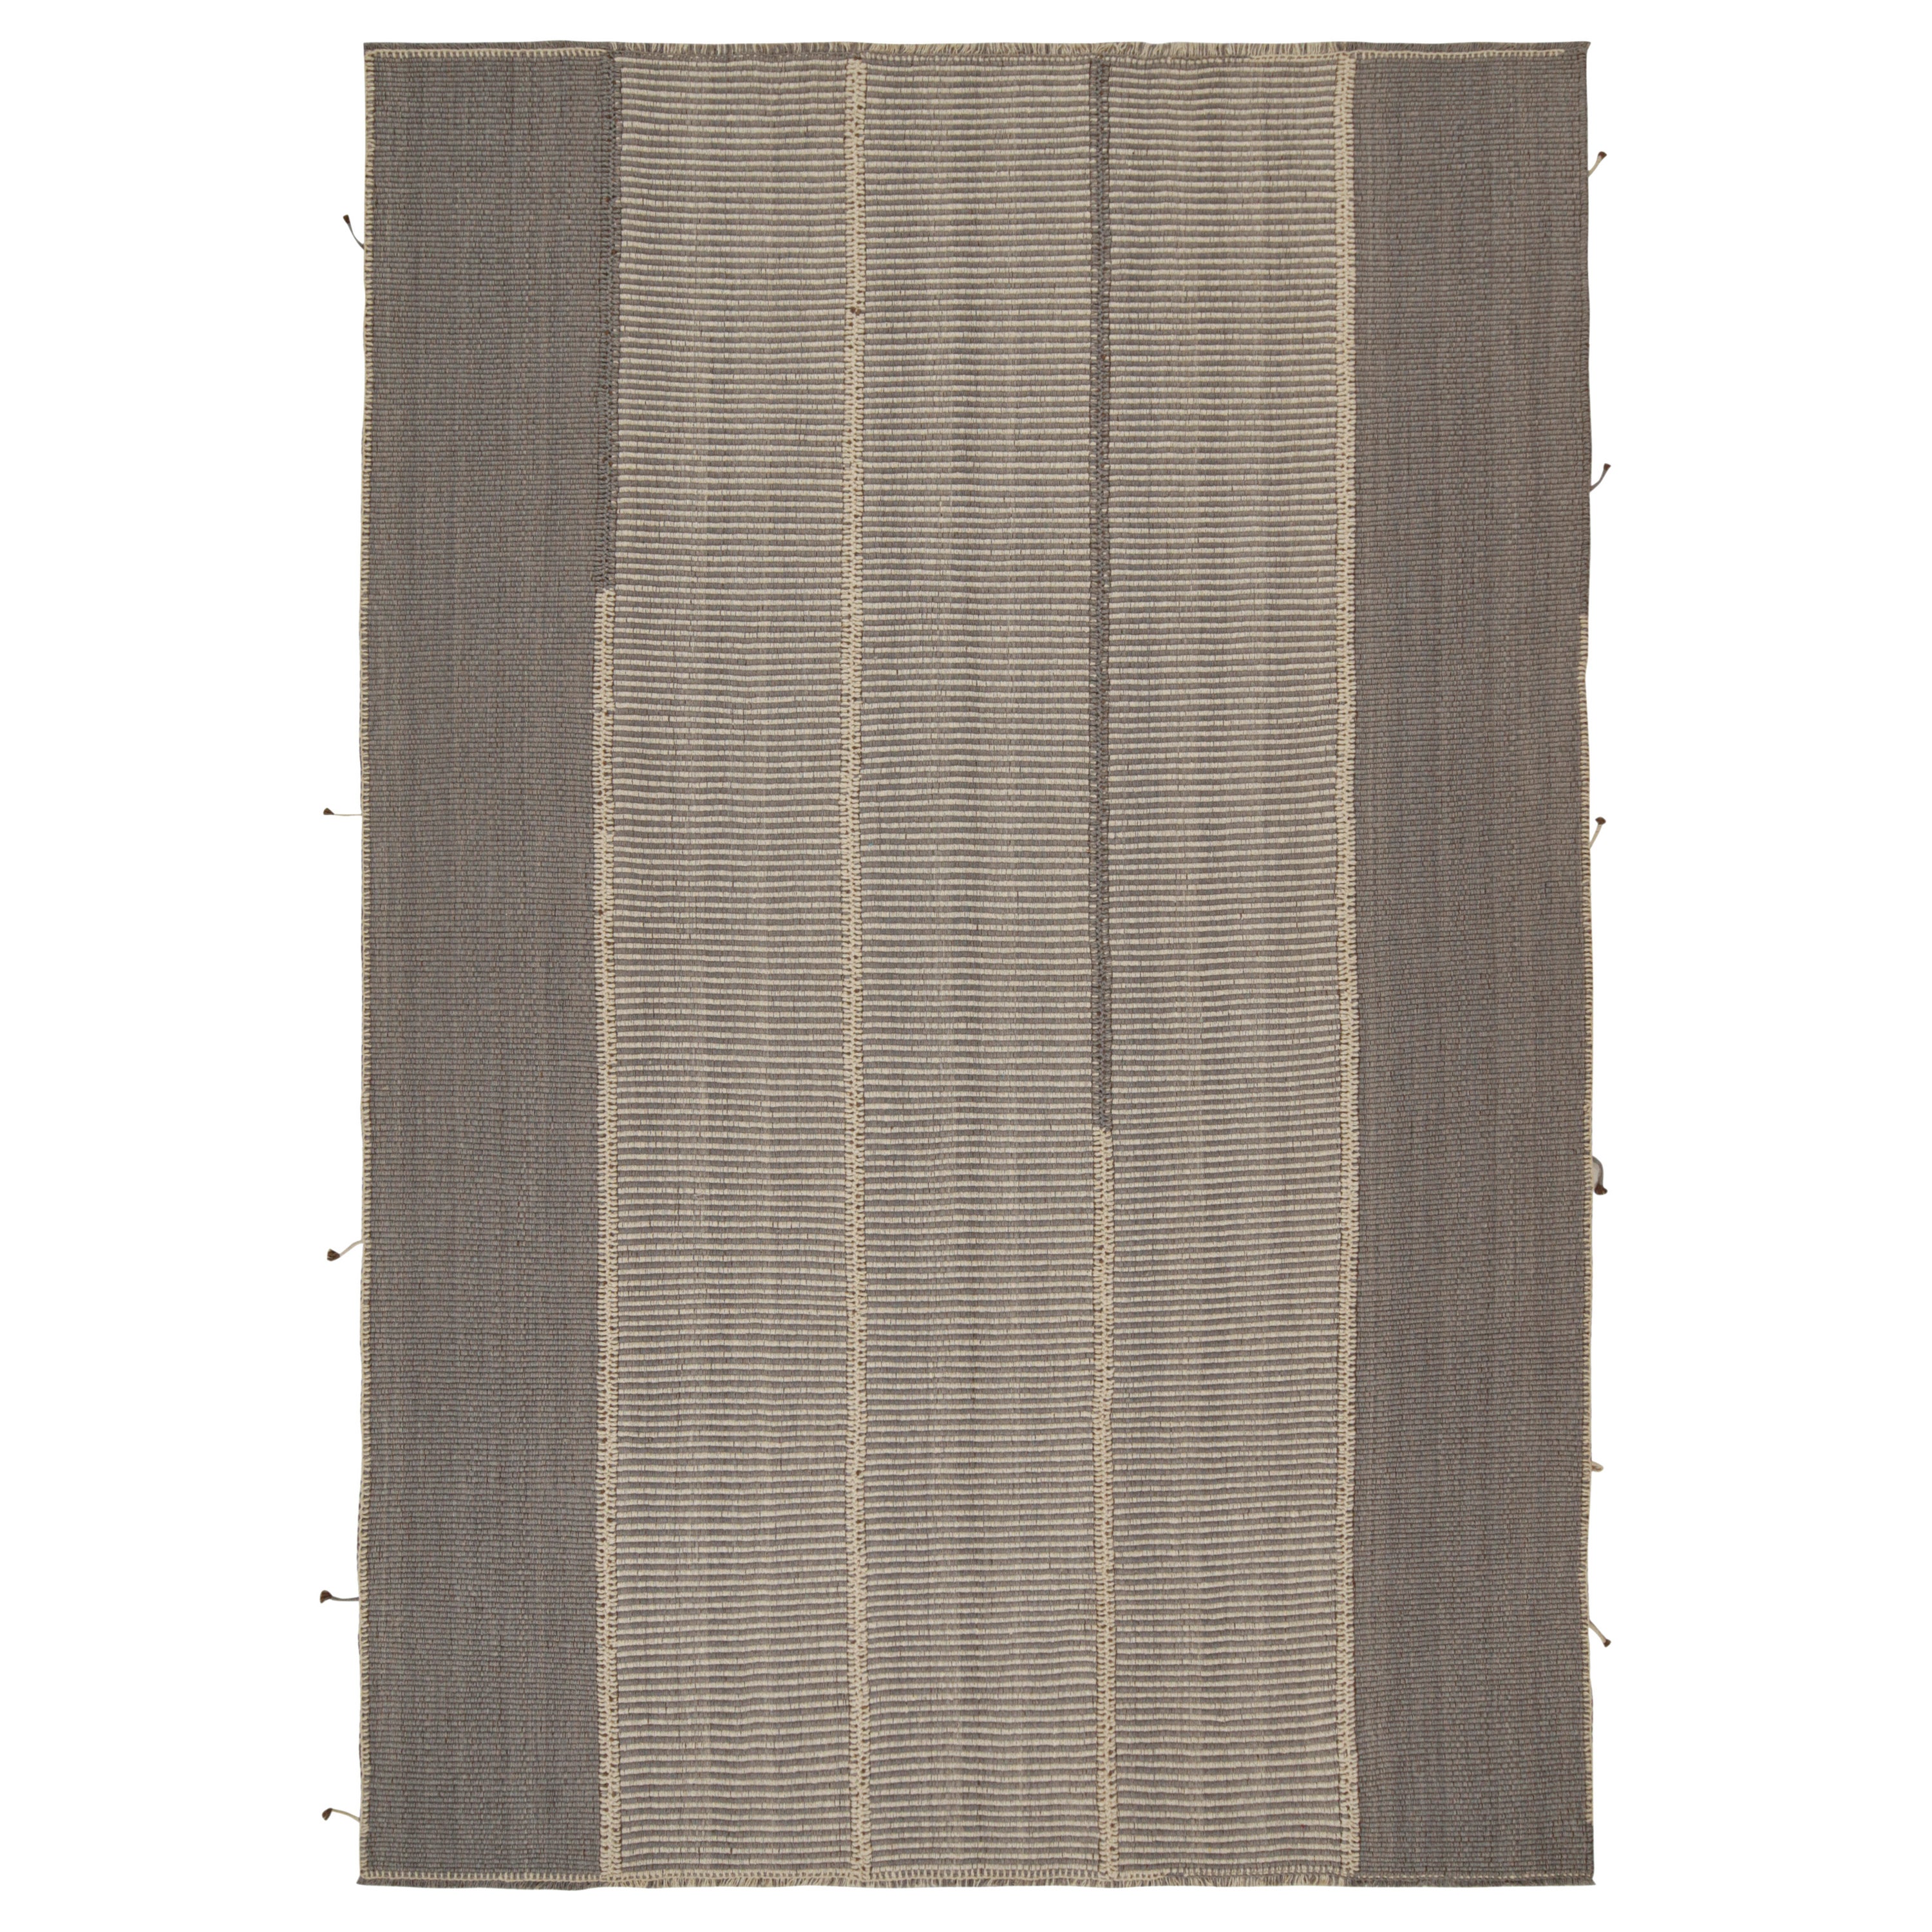 Rug & Kilim’s Contemporary Kilim in Gray and Beige Stripes with Brown Accents For Sale